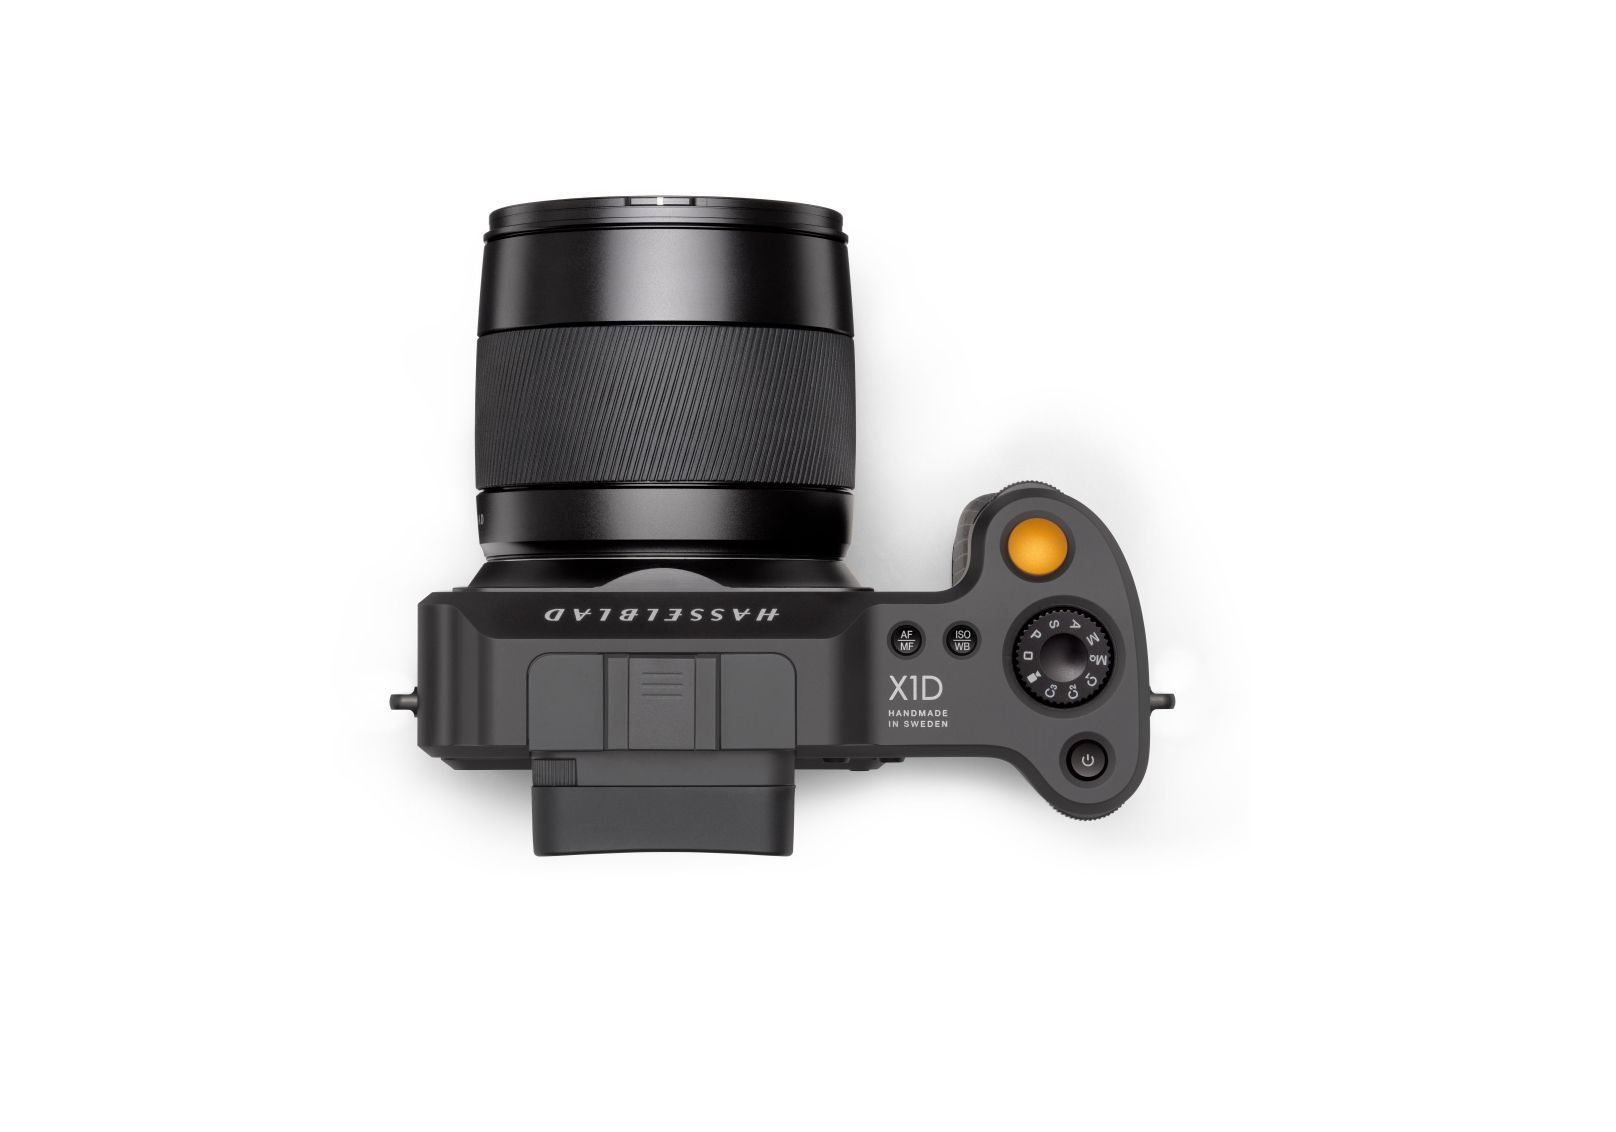 Marking the Swedish camera guru’s 75th anniversary, Hasselblad has released the X1D ‘4116 Edition’, the next phase of the world’s first compact mirrorless medium format camera.